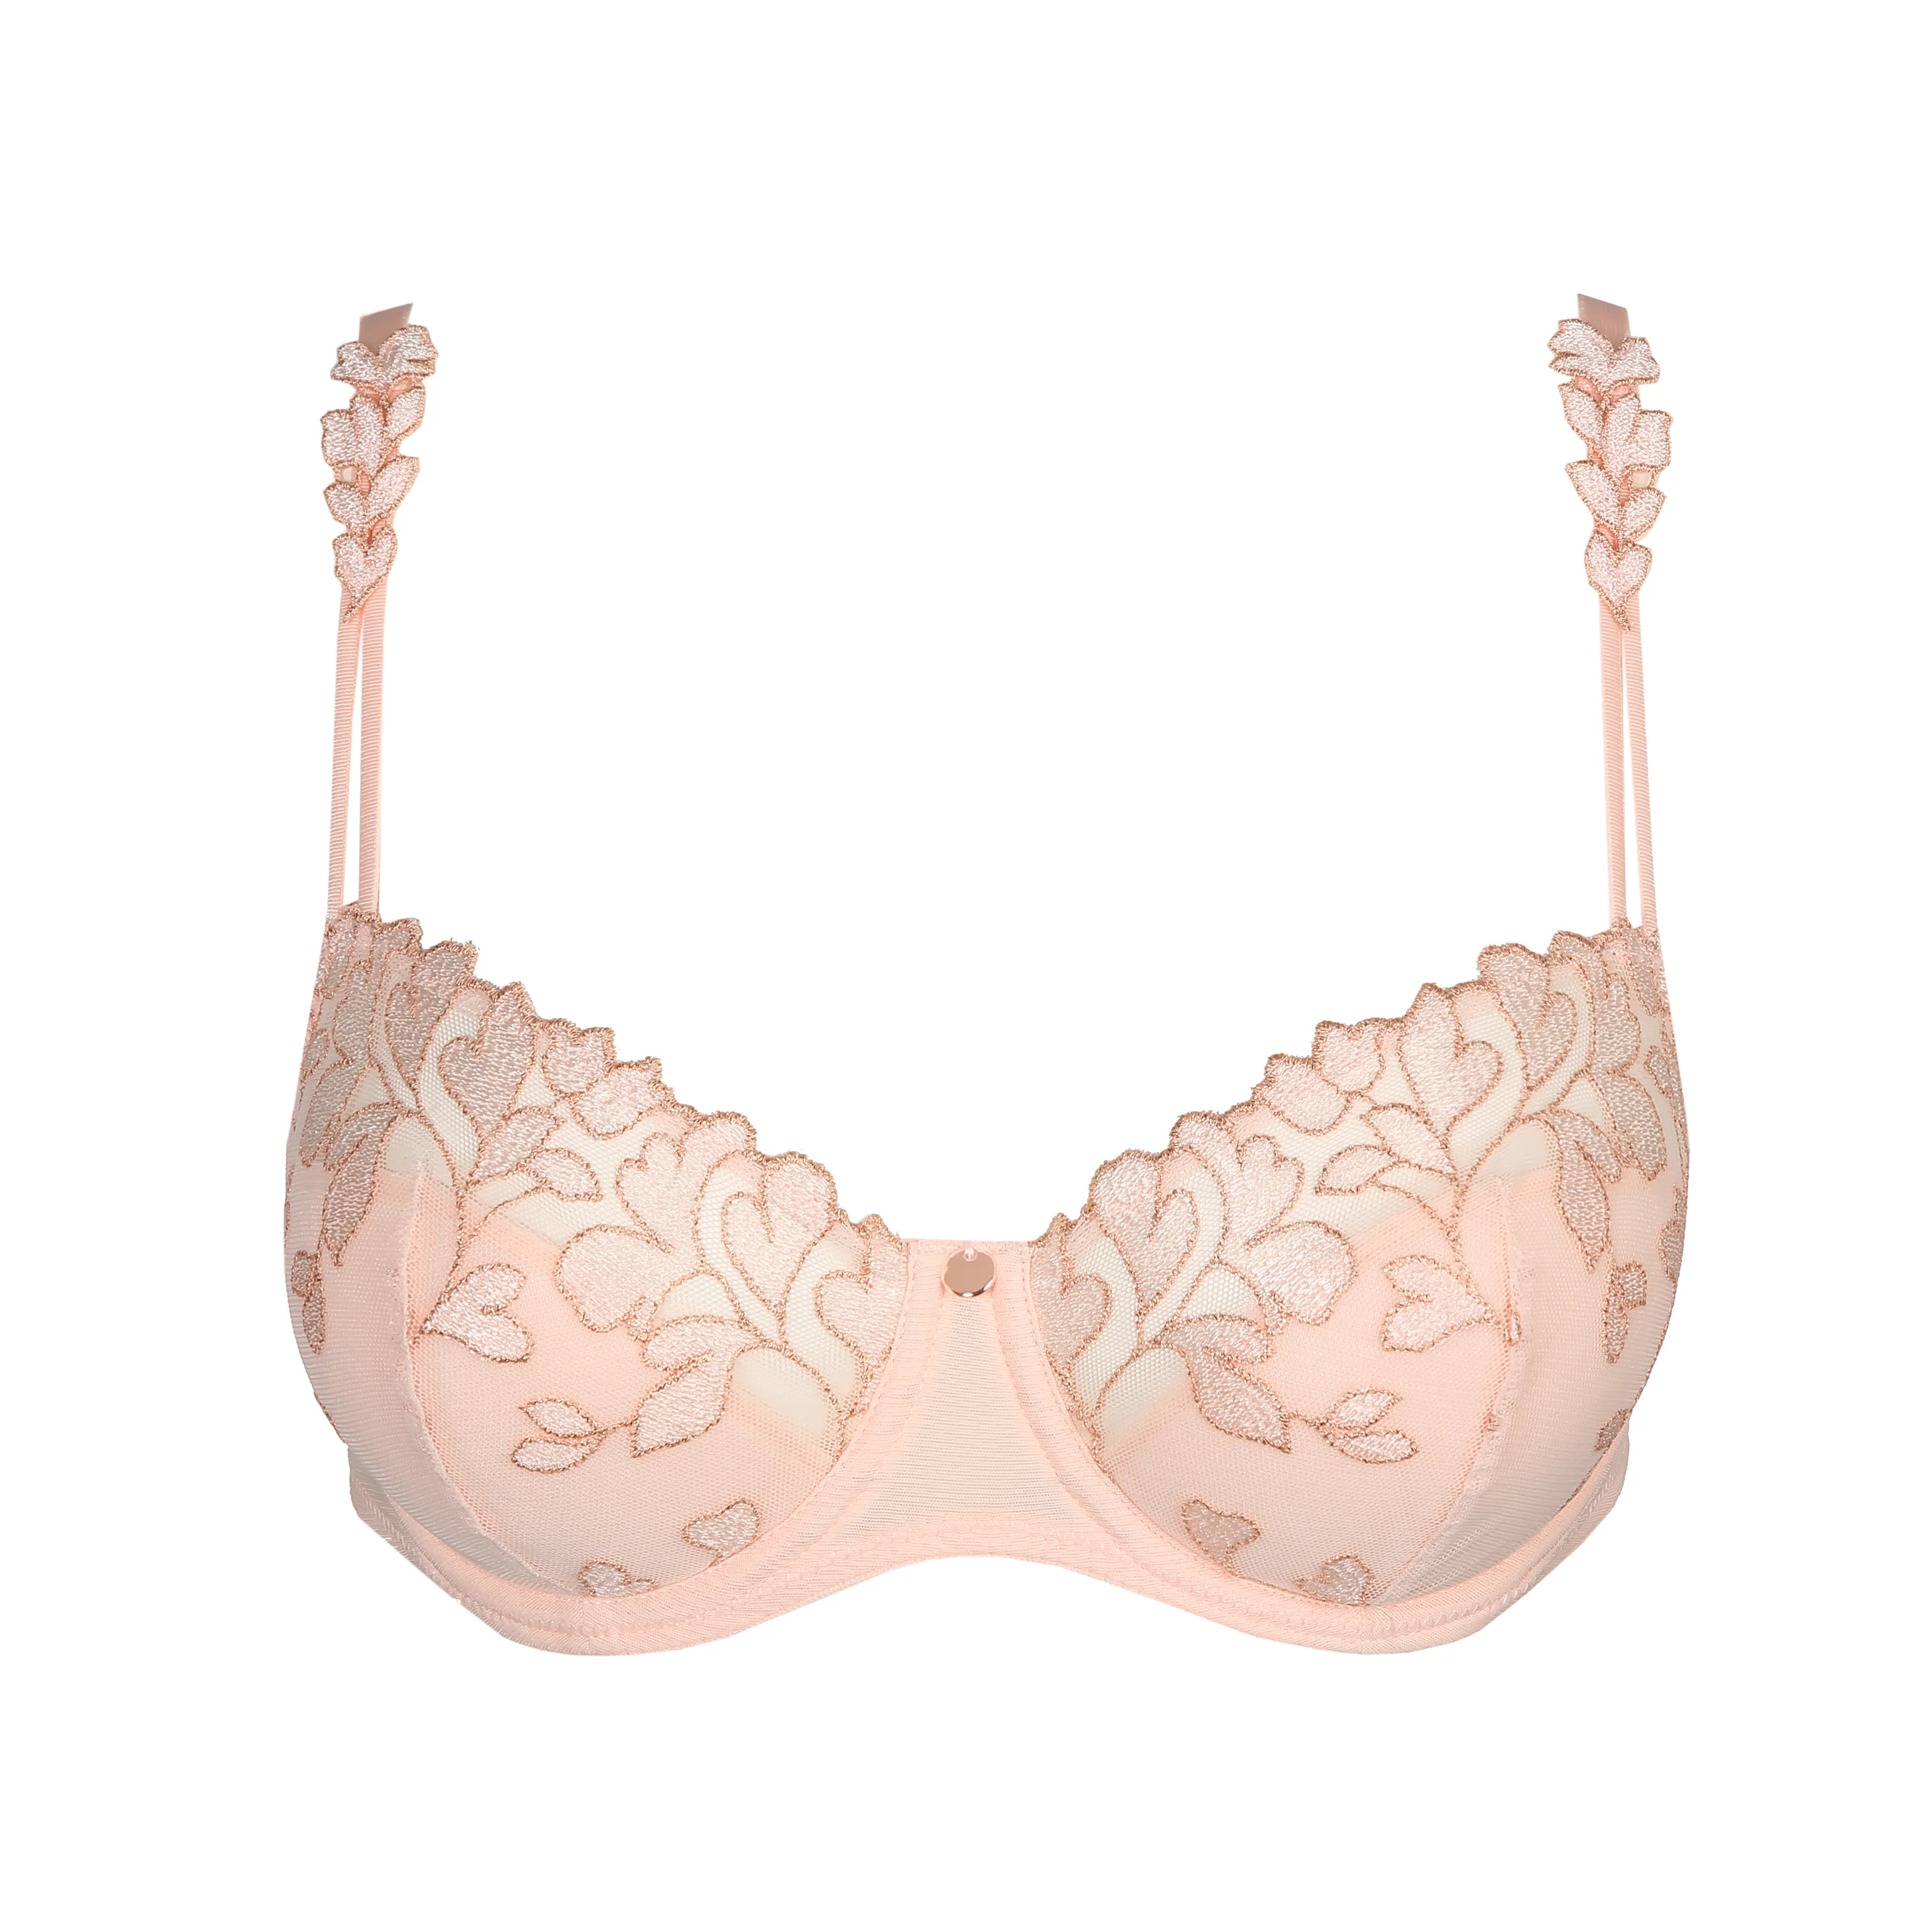 M&S Bras 32A White/Pink PK2 Cotton Rich Balcony Underwired Padded